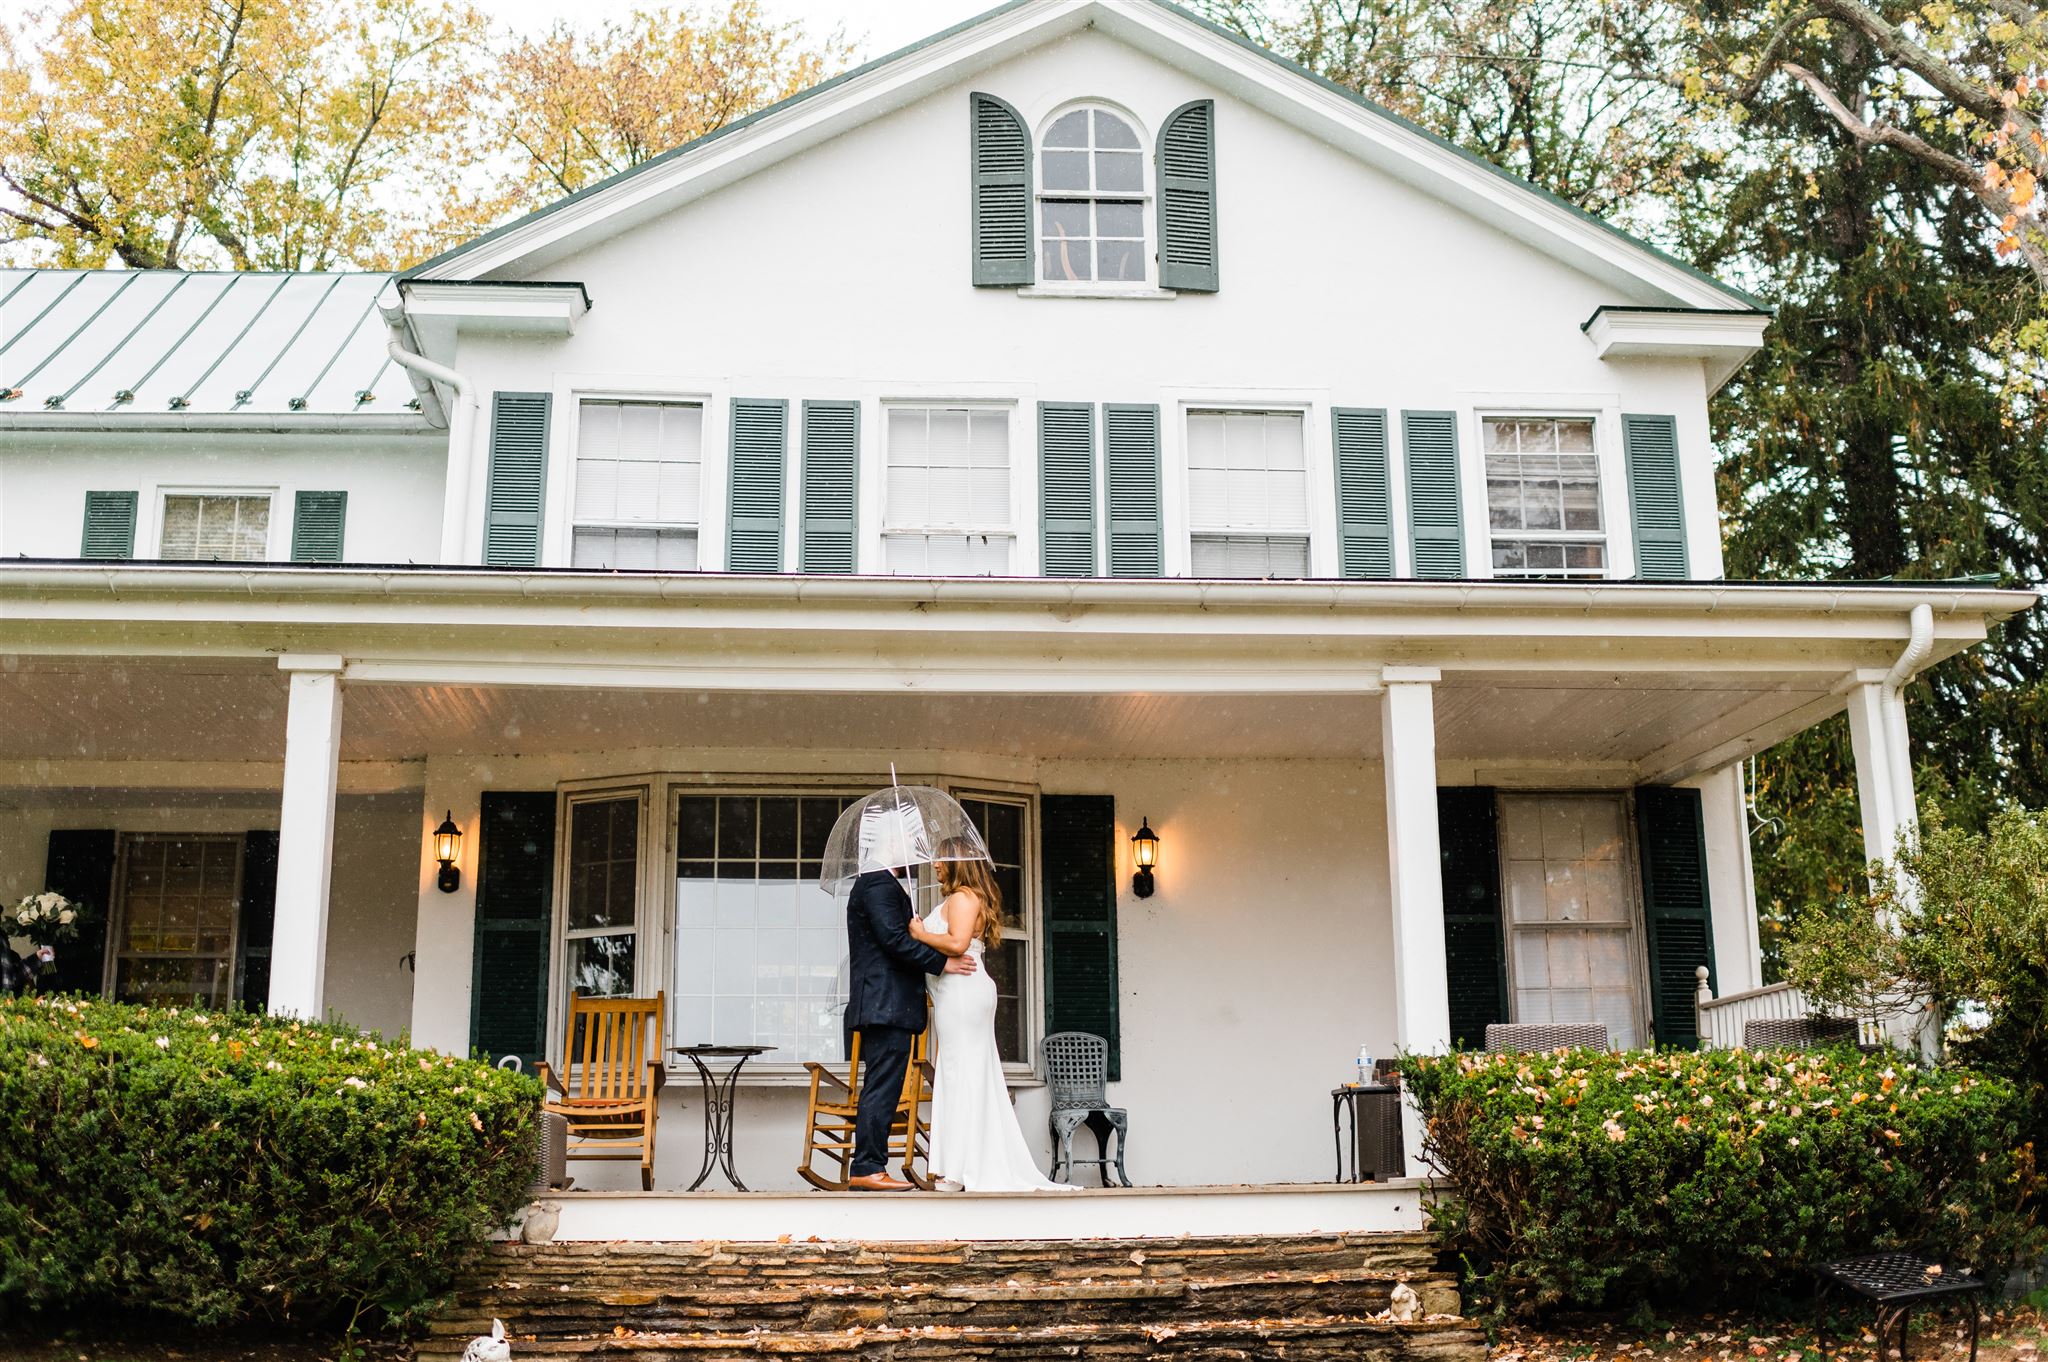 rainy day wedding pictures with bride and groom under a clear umbrella as they stand on the porch of their Shenandoah wedding venue together